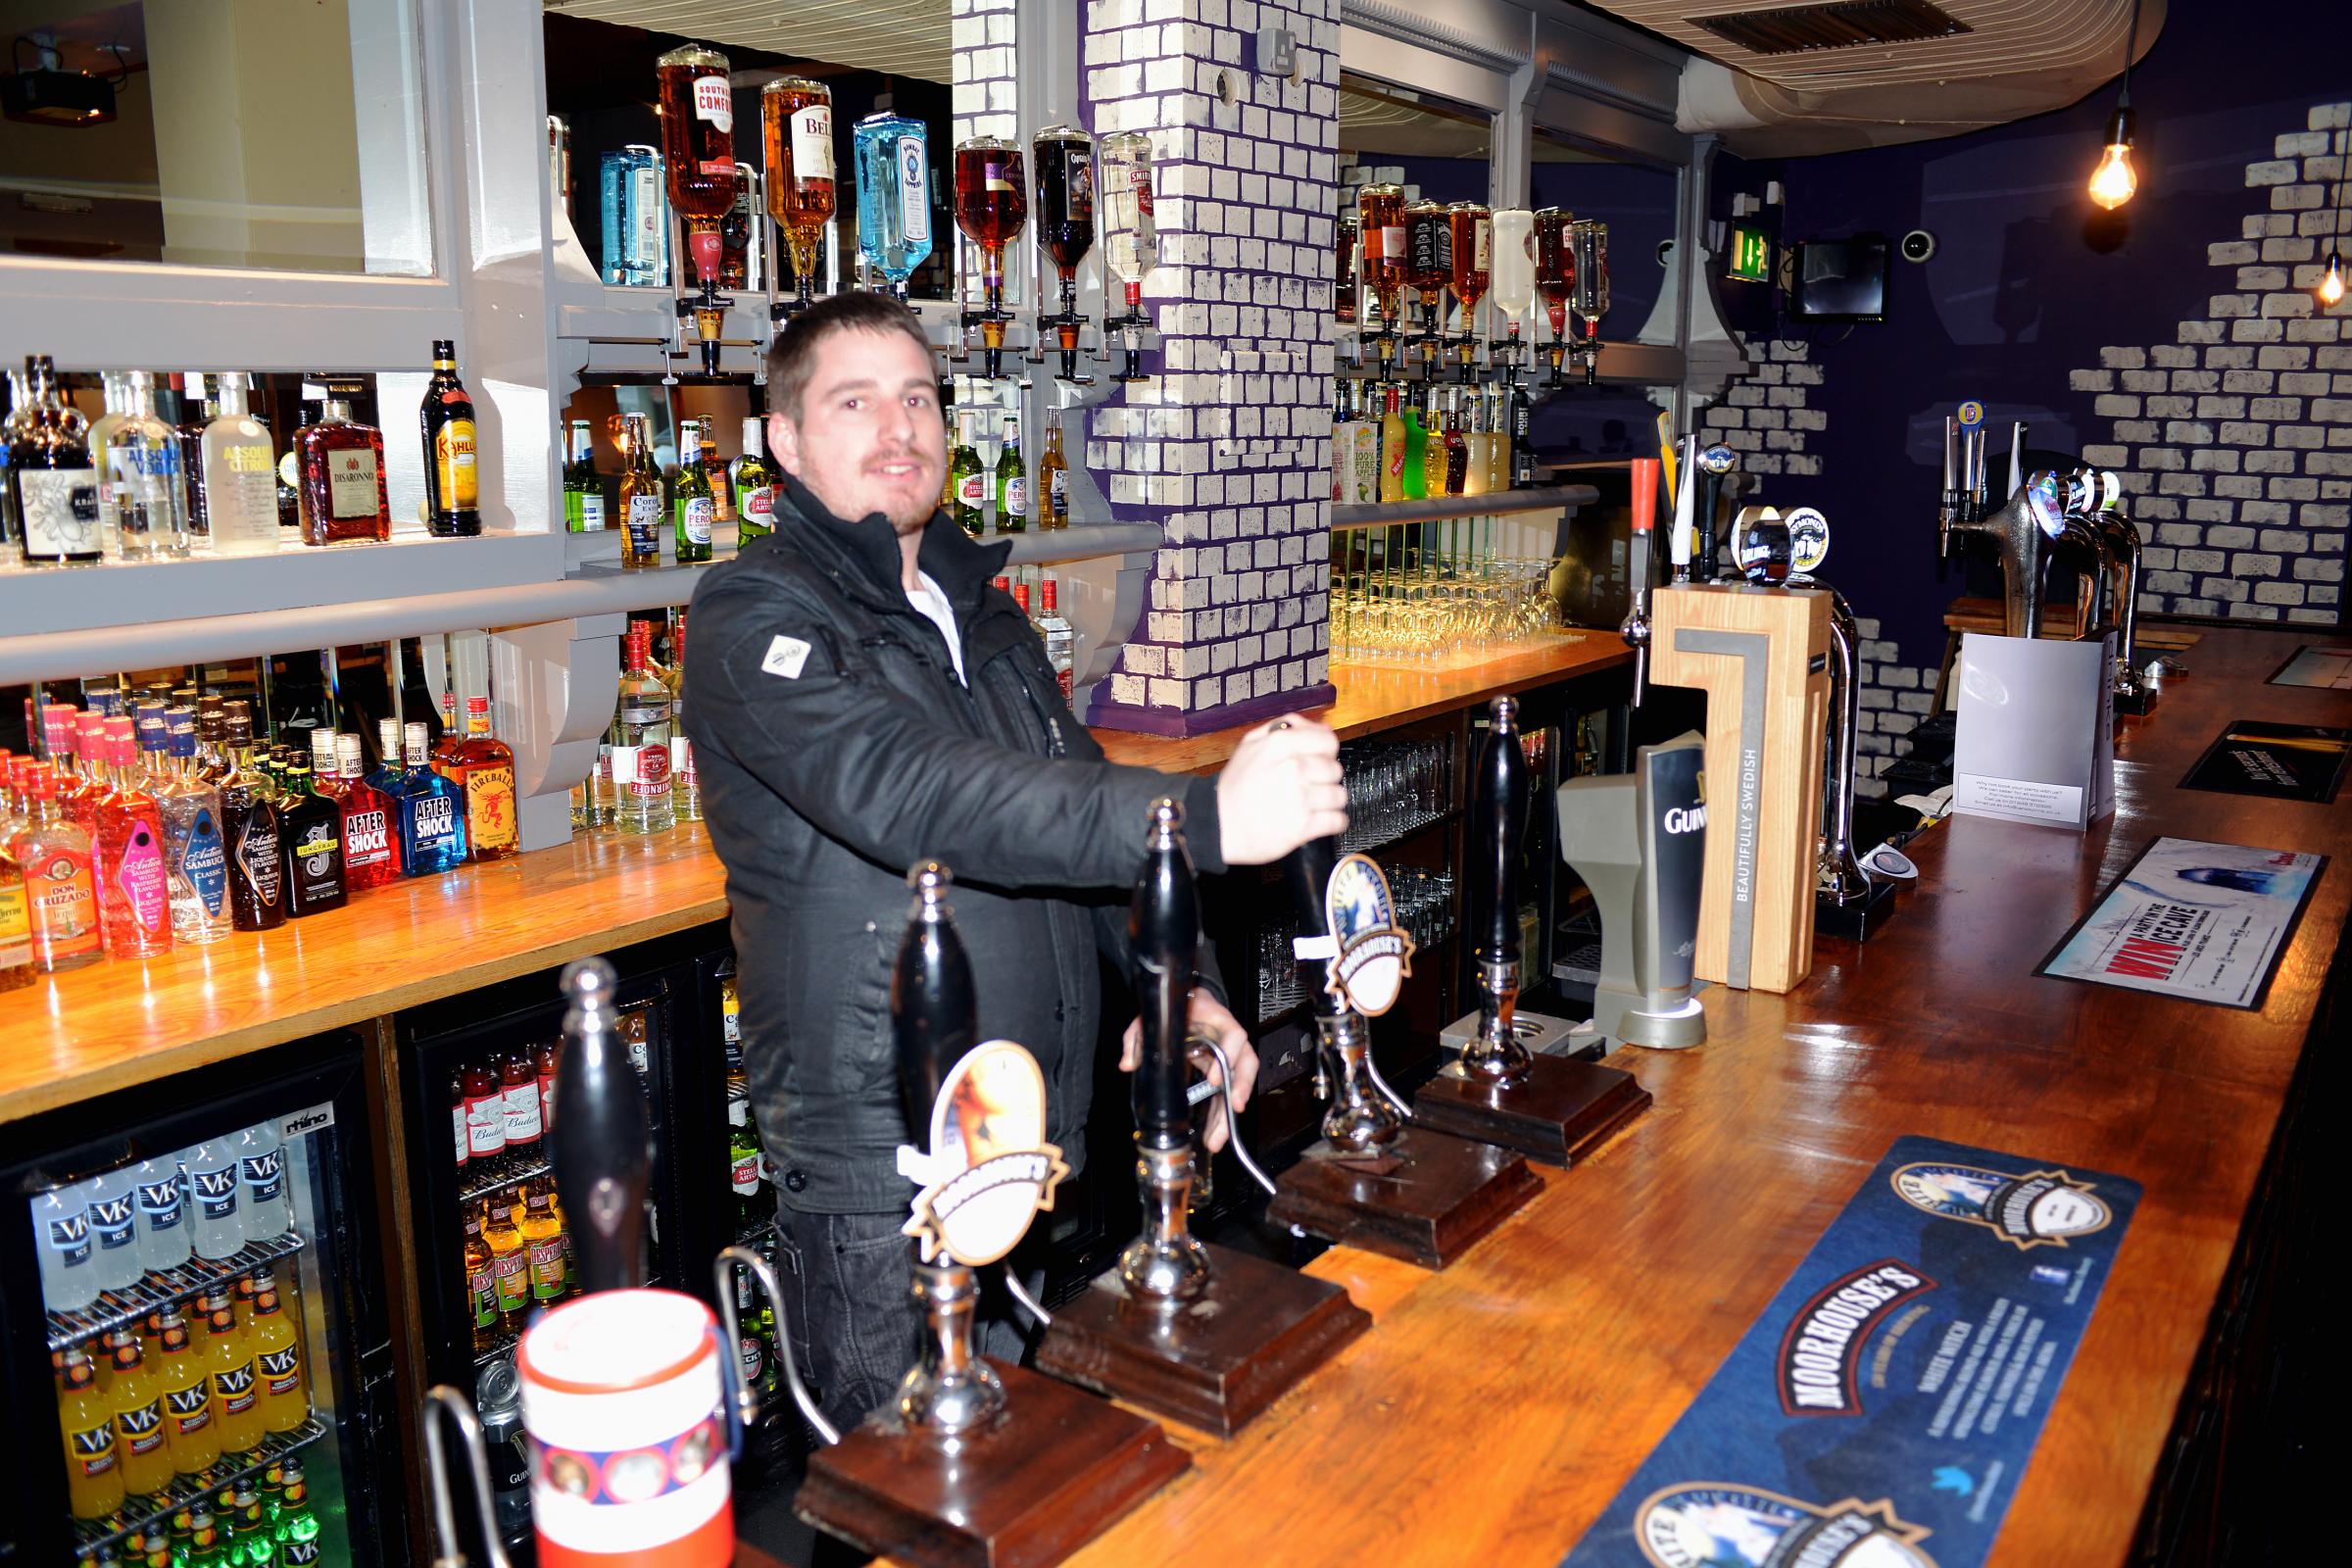 'It's starting to pick up' - Accrington showing signs of getting its nightlife 'mojo' back - Lancashire Telegraph